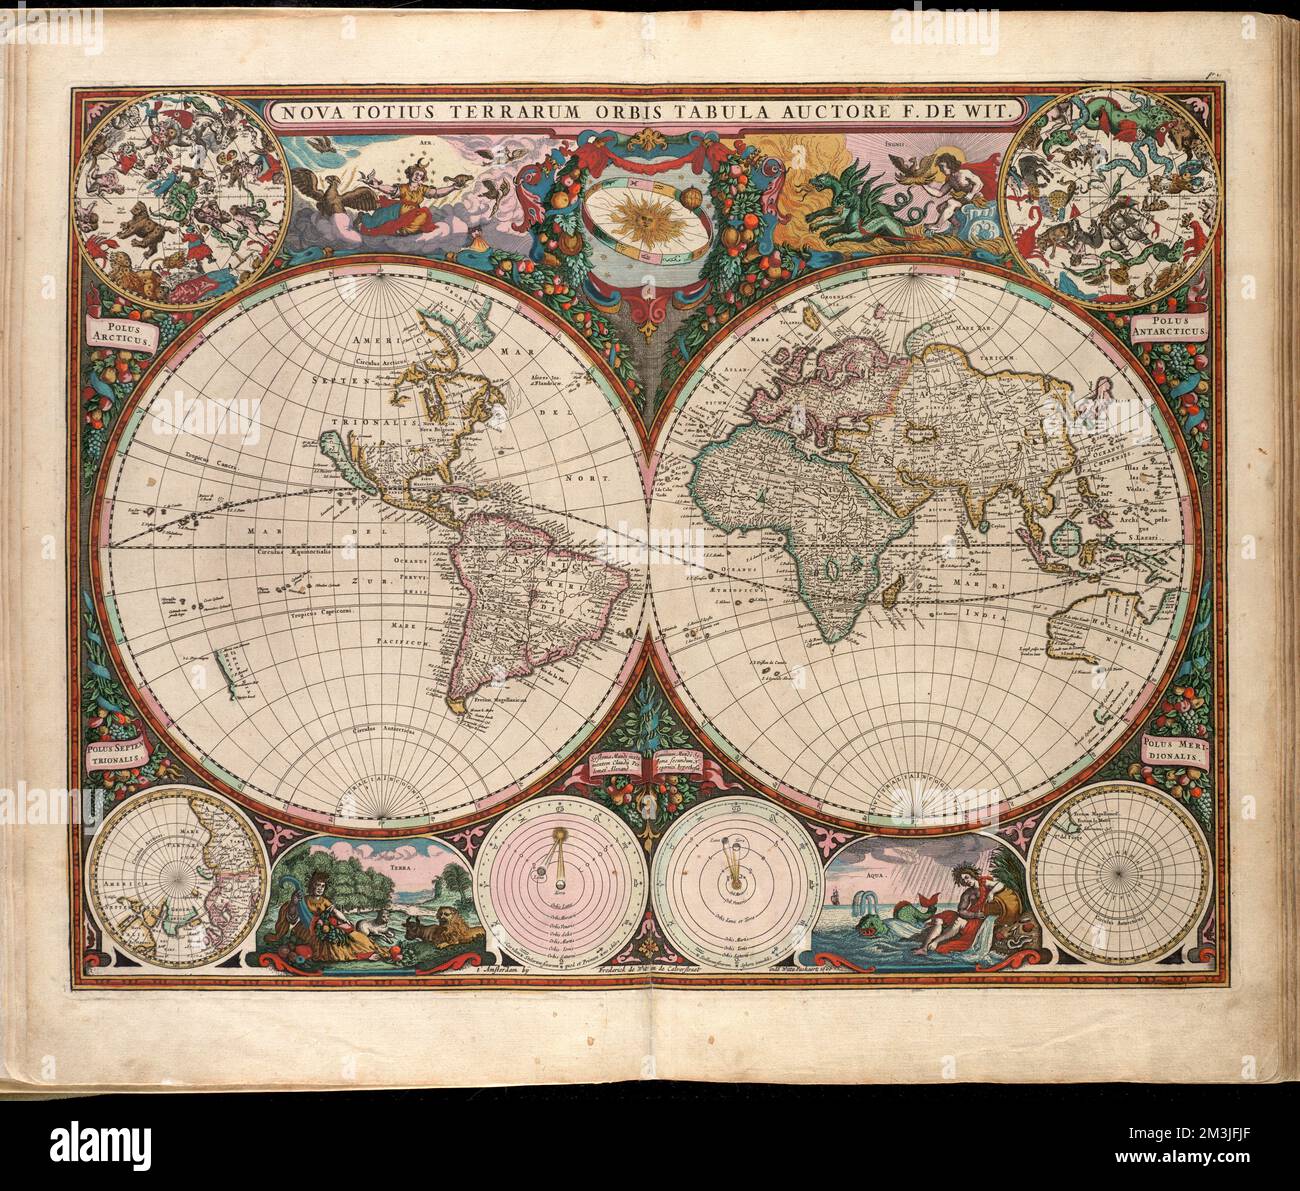 Nova totius terrarum orbis tabula , World maps, Early works to 1800 Norman B. Leventhal Map Center Collection Stock Photo